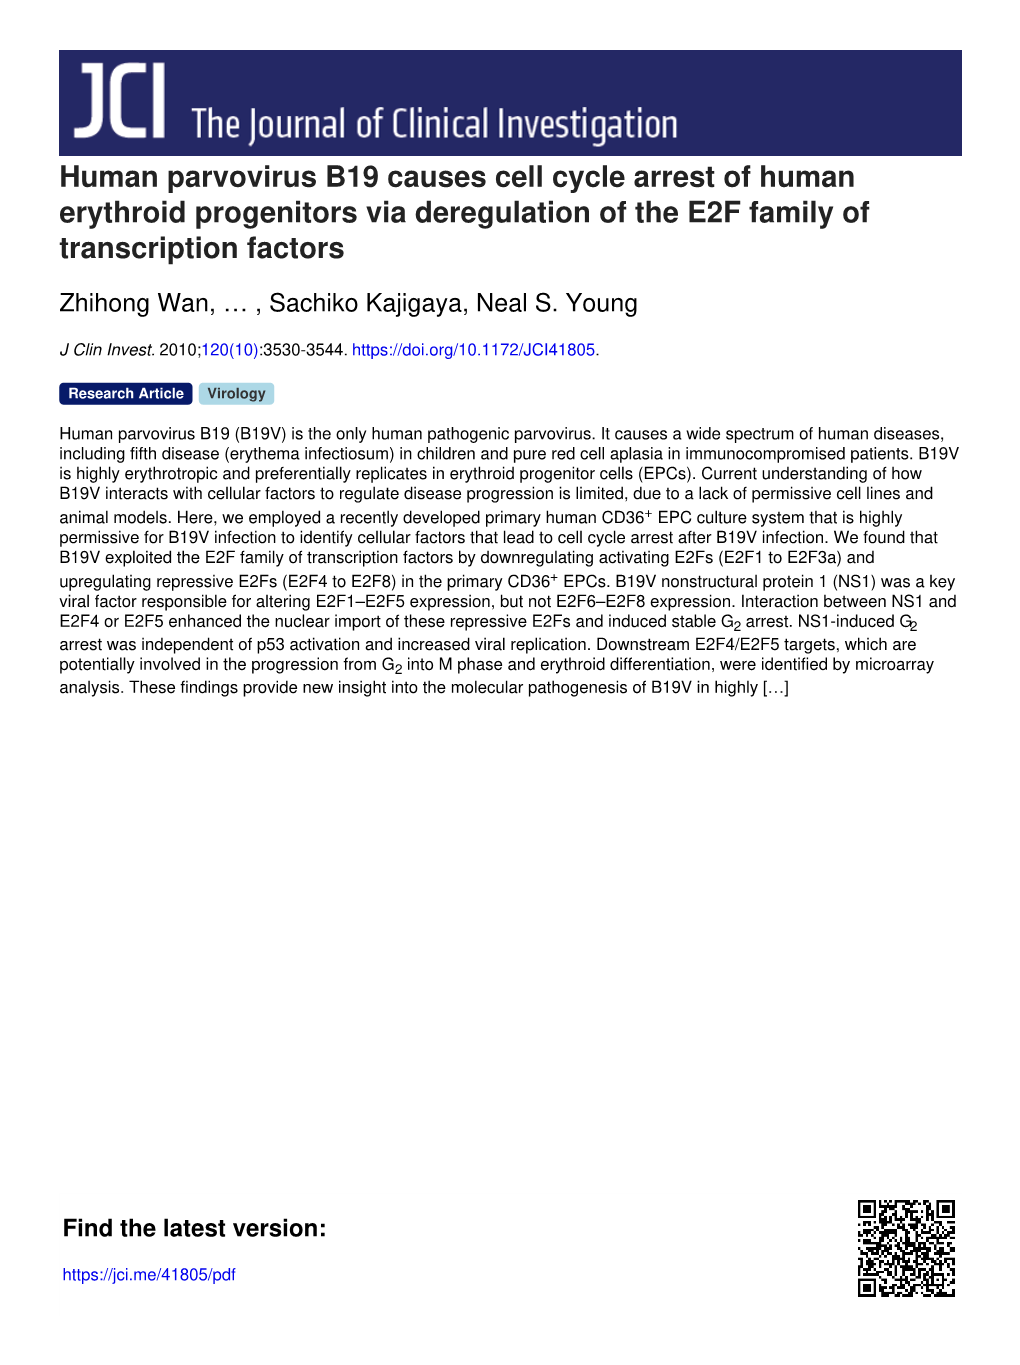 Human Parvovirus B19 Causes Cell Cycle Arrest of Human Erythroid Progenitors Via Deregulation of the E2F Family of Transcription Factors